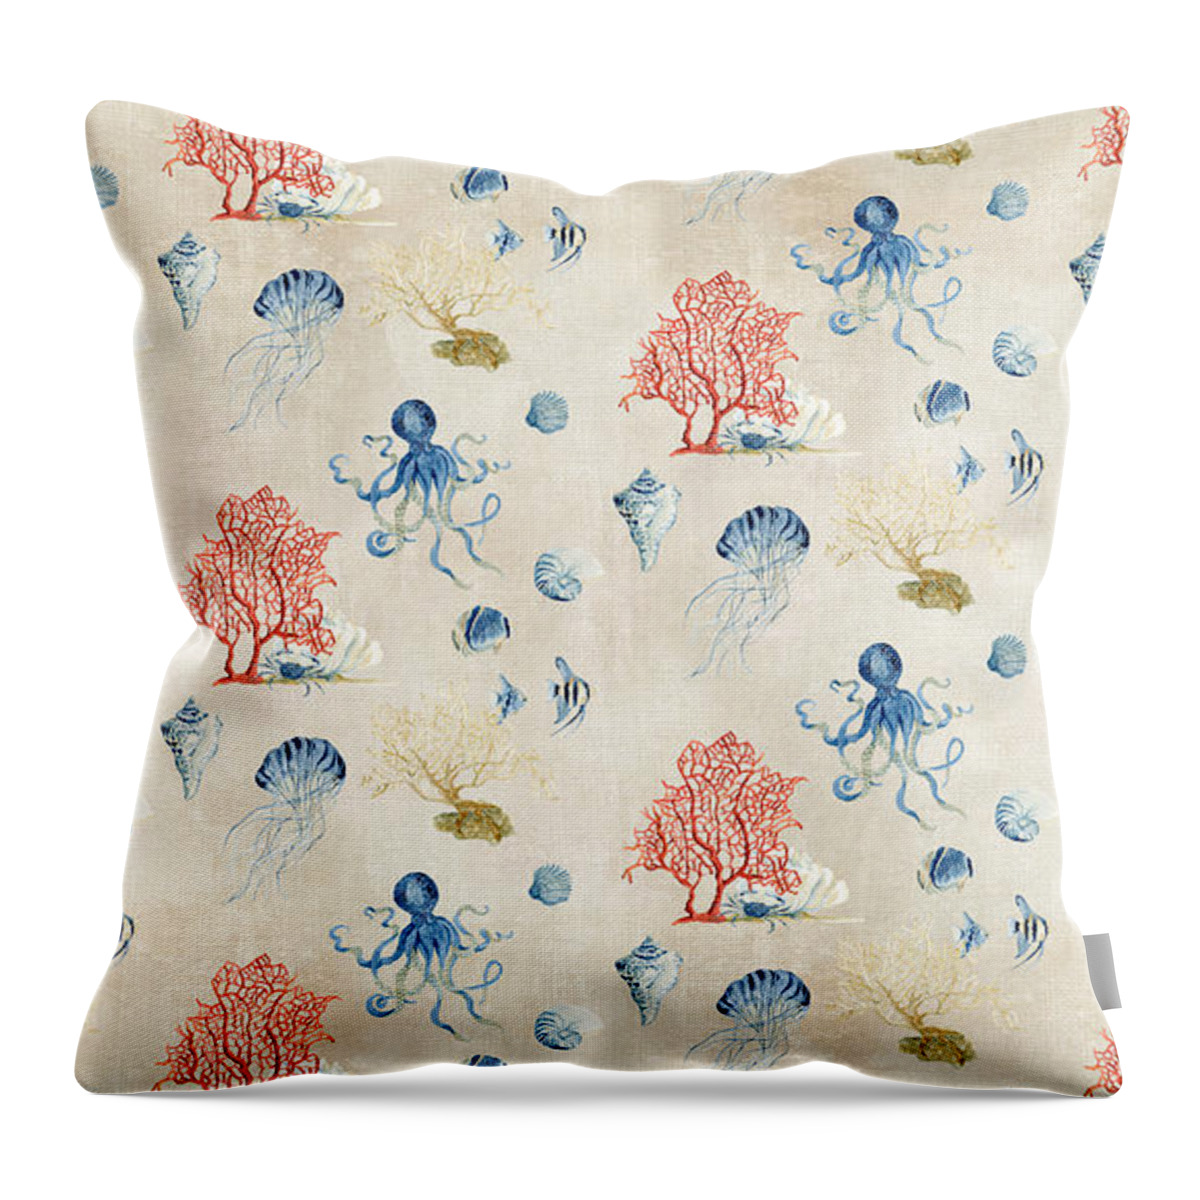 Octopus Throw Pillow featuring the painting Indigo Ocean - Red Coral Octopus Half Drop Pattern Small by Audrey Jeanne Roberts